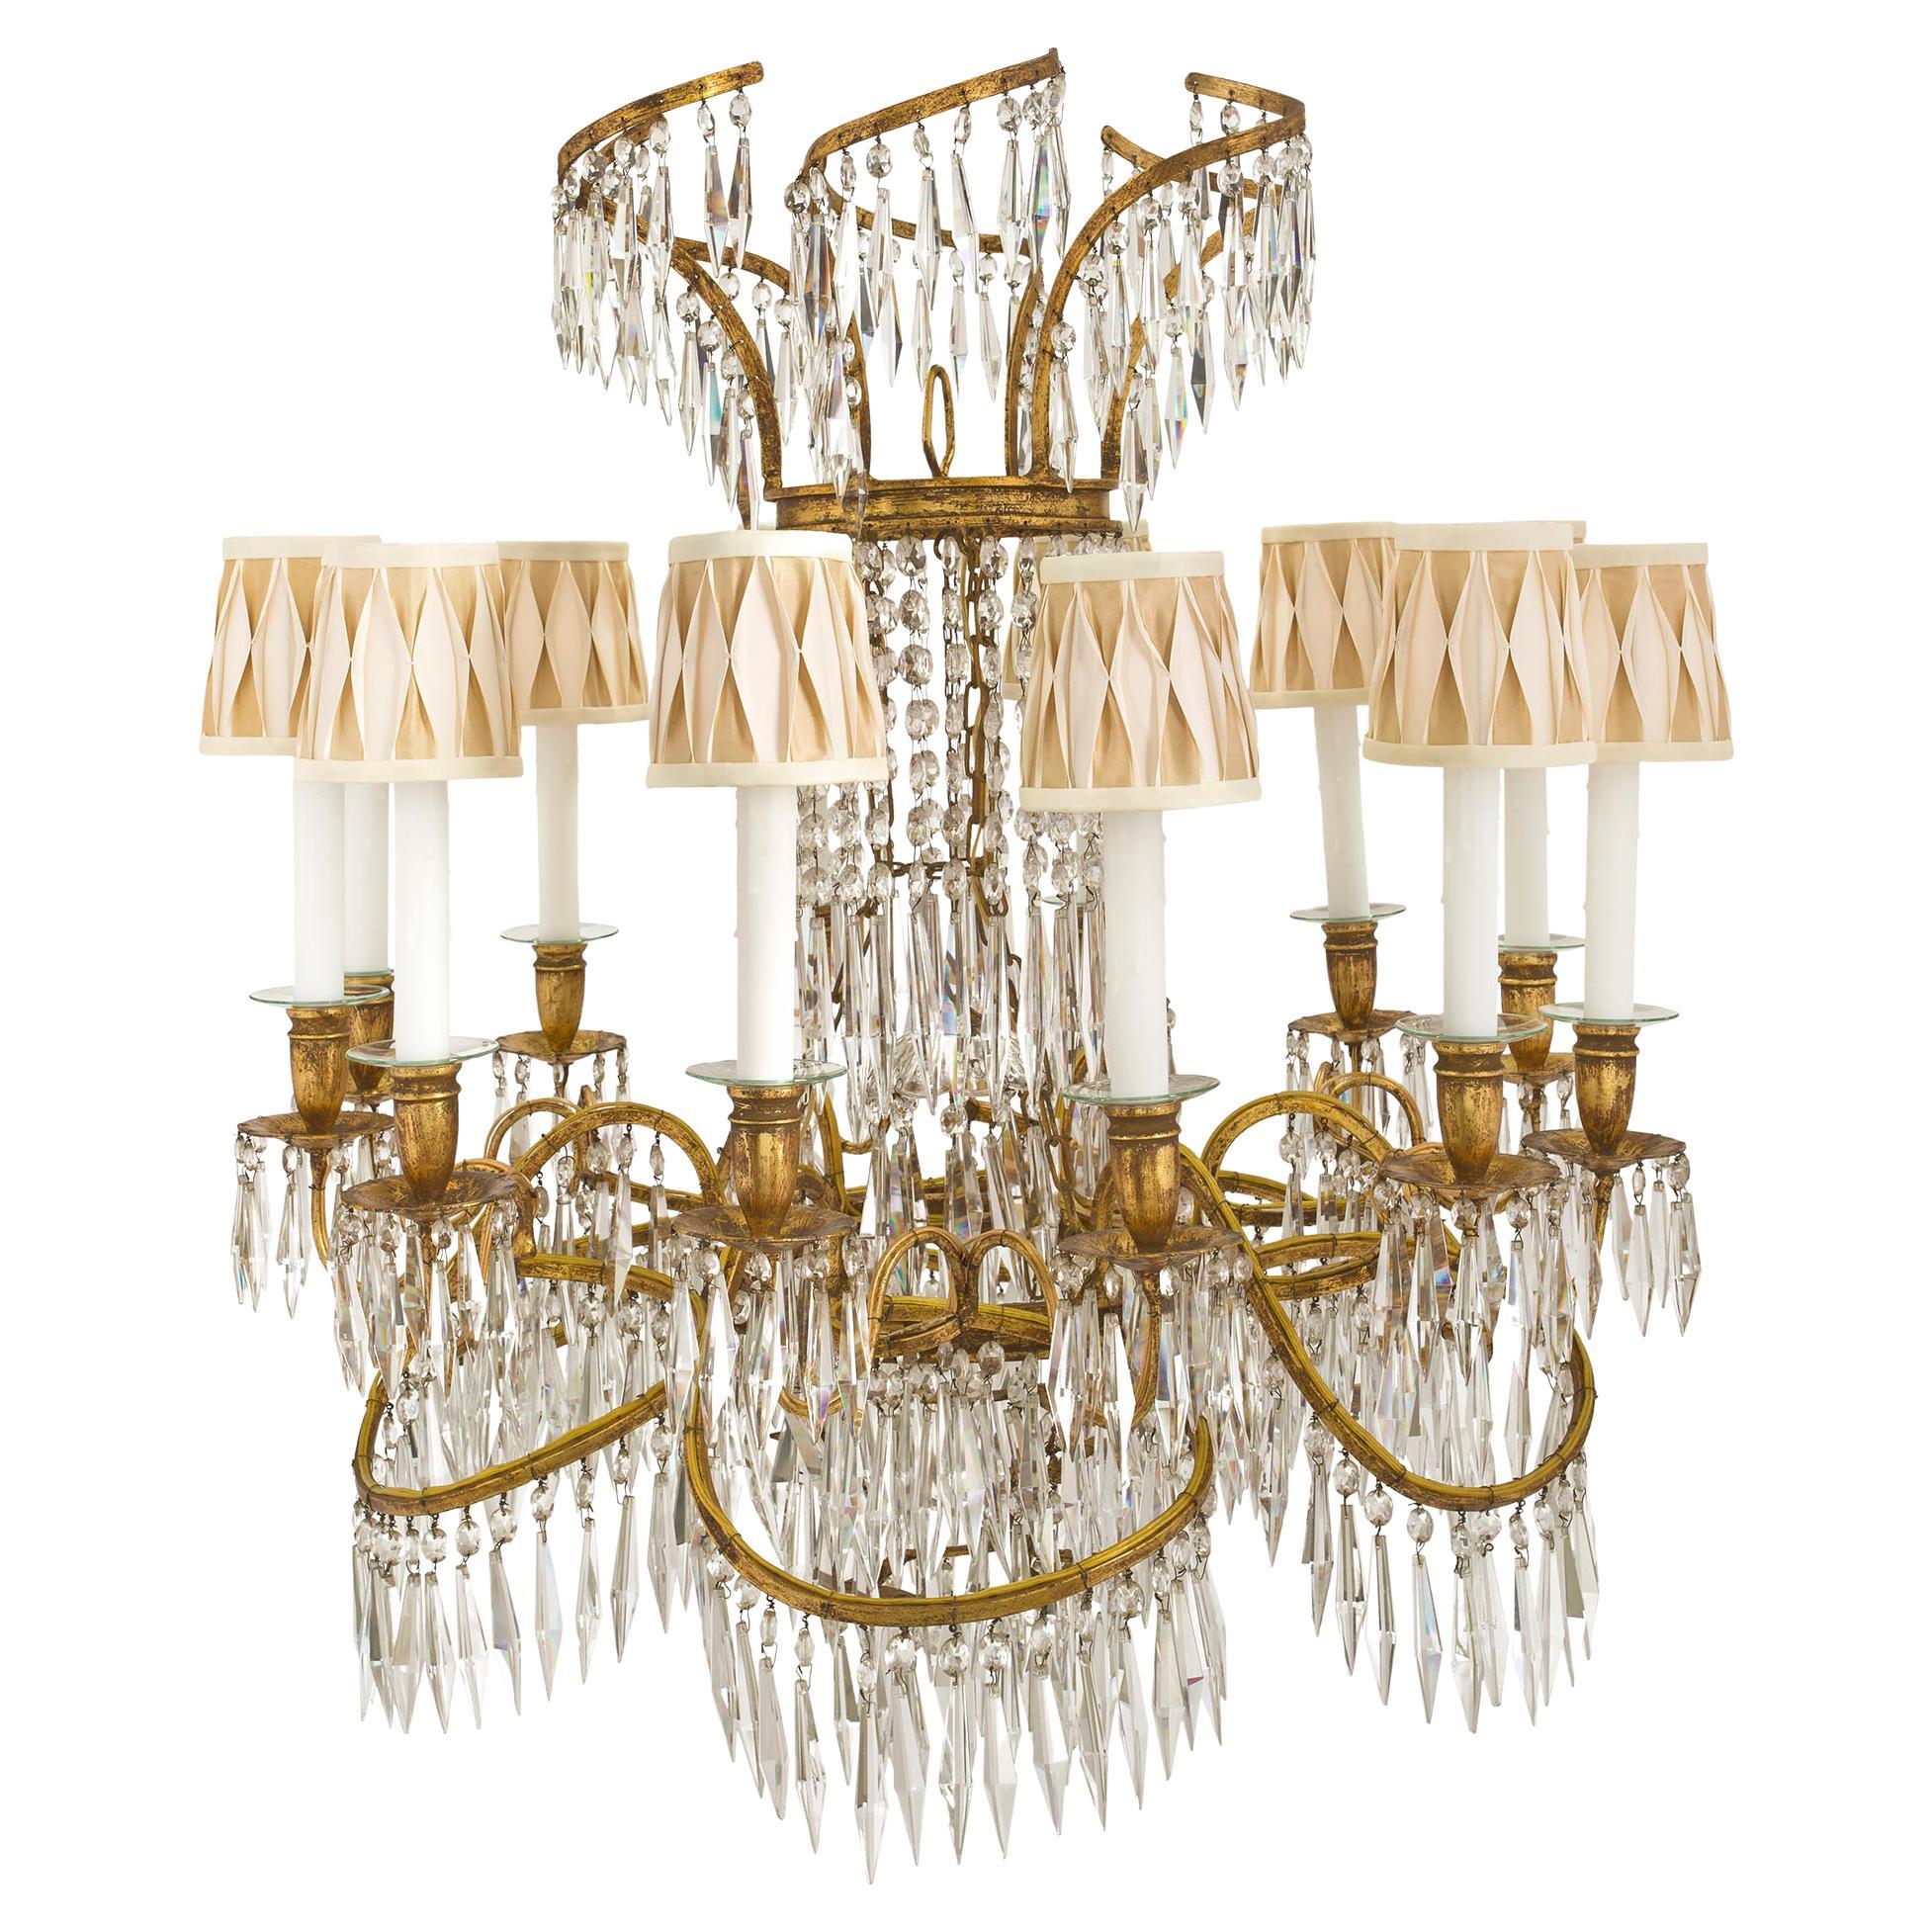 Baltic 19th Century Neoclassical Style Gilt Iron and Crystal Chandelier For Sale